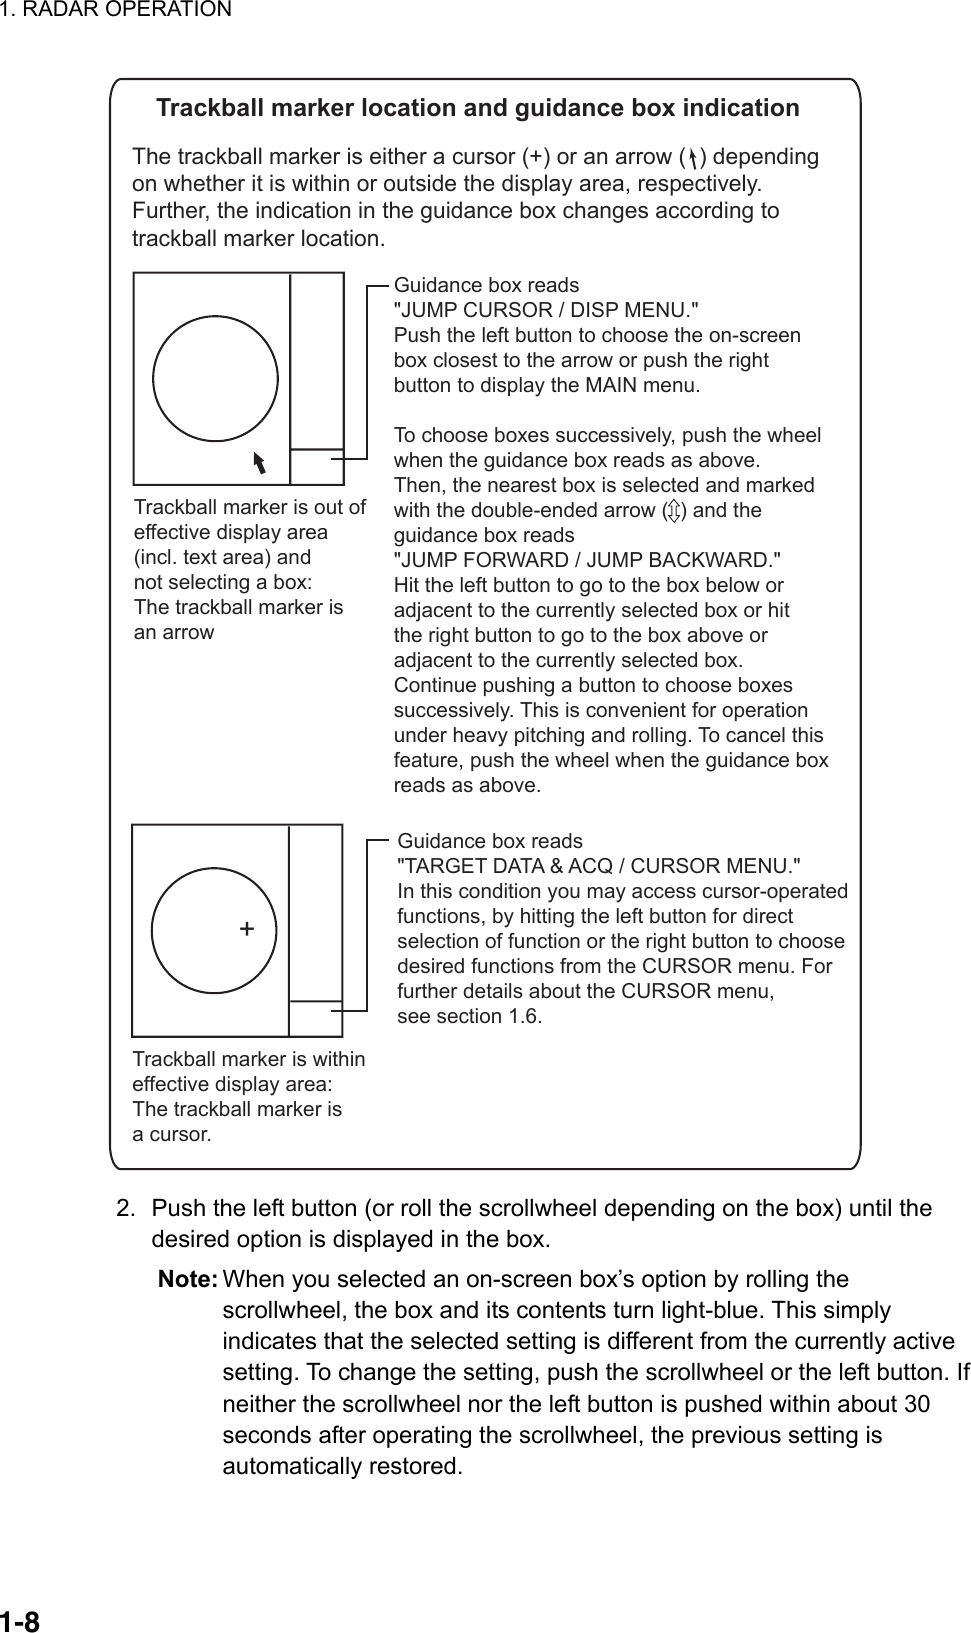 1. RADAR OPERATION  1-8    Trackball marker location and guidance box indicationThe trackball marker is either a cursor (+) or an arrow (  ) dependingon whether it is within or outside the display area, respectively.Further, the indication in the guidance box changes according totrackball marker location. Trackball marker is withineffective display area: The trackball marker isa cursor.+Guidance box reads&quot;TARGET DATA &amp; ACQ / CURSOR MENU.&quot;In this condition you may access cursor-operatedfunctions, by hitting the left button for directselection of function or the right button to choosedesired functions from the CURSOR menu. Forfurther details about the CURSOR menu,see section 1.6.Trackball marker is out ofeffective display area(incl. text area) andnot selecting a box:The trackball marker isan arrow Guidance box reads&quot;JUMP CURSOR / DISP MENU.&quot;Push the left button to choose the on-screenbox closest to the arrow or push the rightbutton to display the MAIN menu.To choose boxes successively, push the wheelwhen the guidance box reads as above.Then, the nearest box is selected and markedwith the double-ended arrow (  ) and theguidance box reads&quot;JUMP FORWARD / JUMP BACKWARD.&quot; Hit the left button to go to the box below oradjacent to the currently selected box or hitthe right button to go to the box above oradjacent to the currently selected box.Continue pushing a button to choose boxessuccessively. This is convenient for operationunder heavy pitching and rolling. To cancel thisfeature, push the wheel when the guidance boxreads as above.  2.  Push the left button (or roll the scrollwheel depending on the box) until the desired option is displayed in the box. Note: When you selected an on-screen box’s option by rolling the scrollwheel, the box and its contents turn light-blue. This simply indicates that the selected setting is different from the currently active setting. To change the setting, push the scrollwheel or the left button. If neither the scrollwheel nor the left button is pushed within about 30 seconds after operating the scrollwheel, the previous setting is automatically restored. 